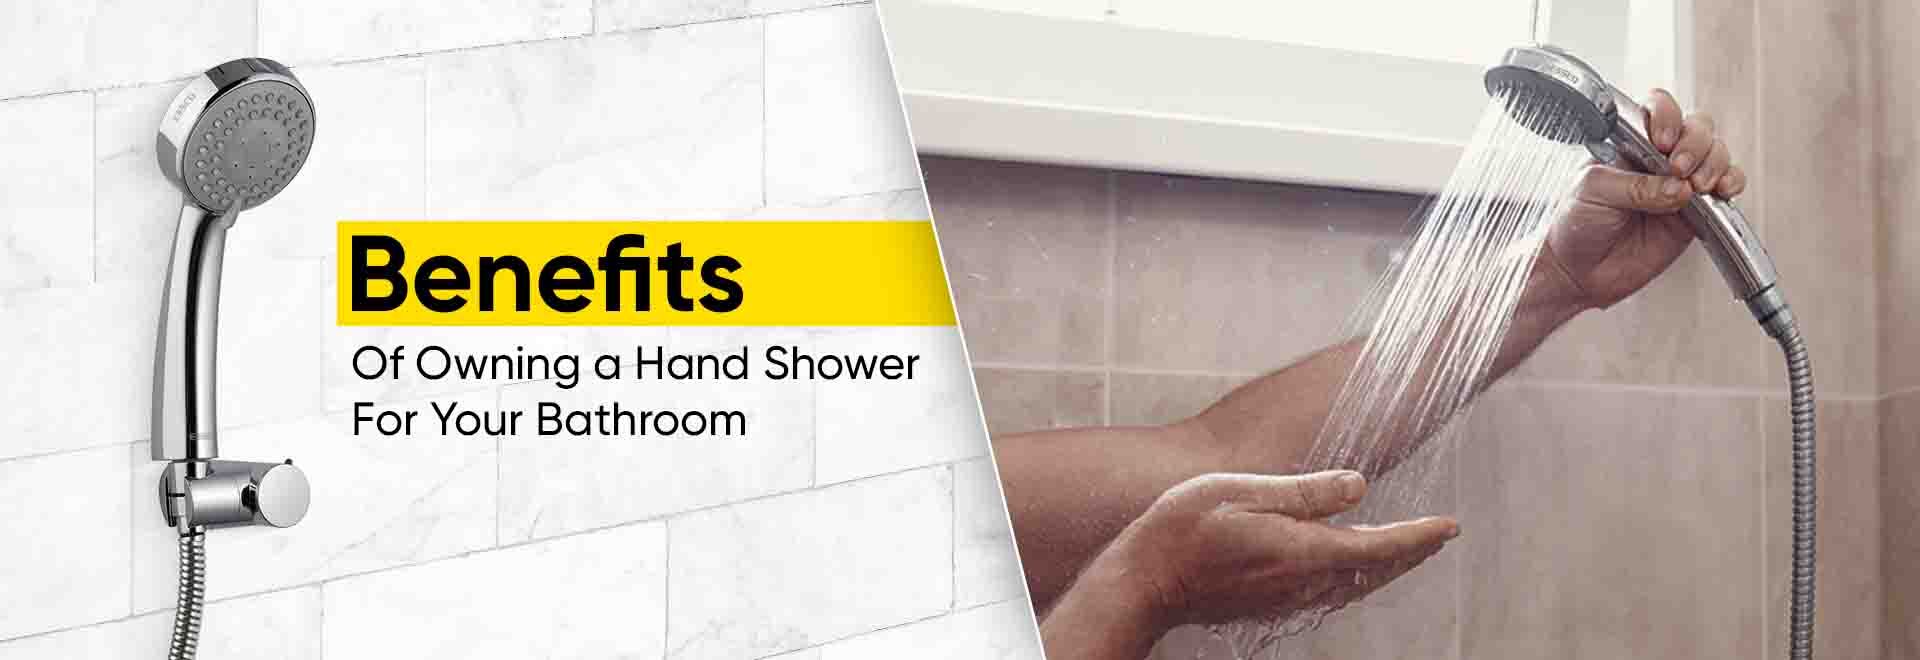 Benefits Of Owning a Hand Shower for Your Bathroom